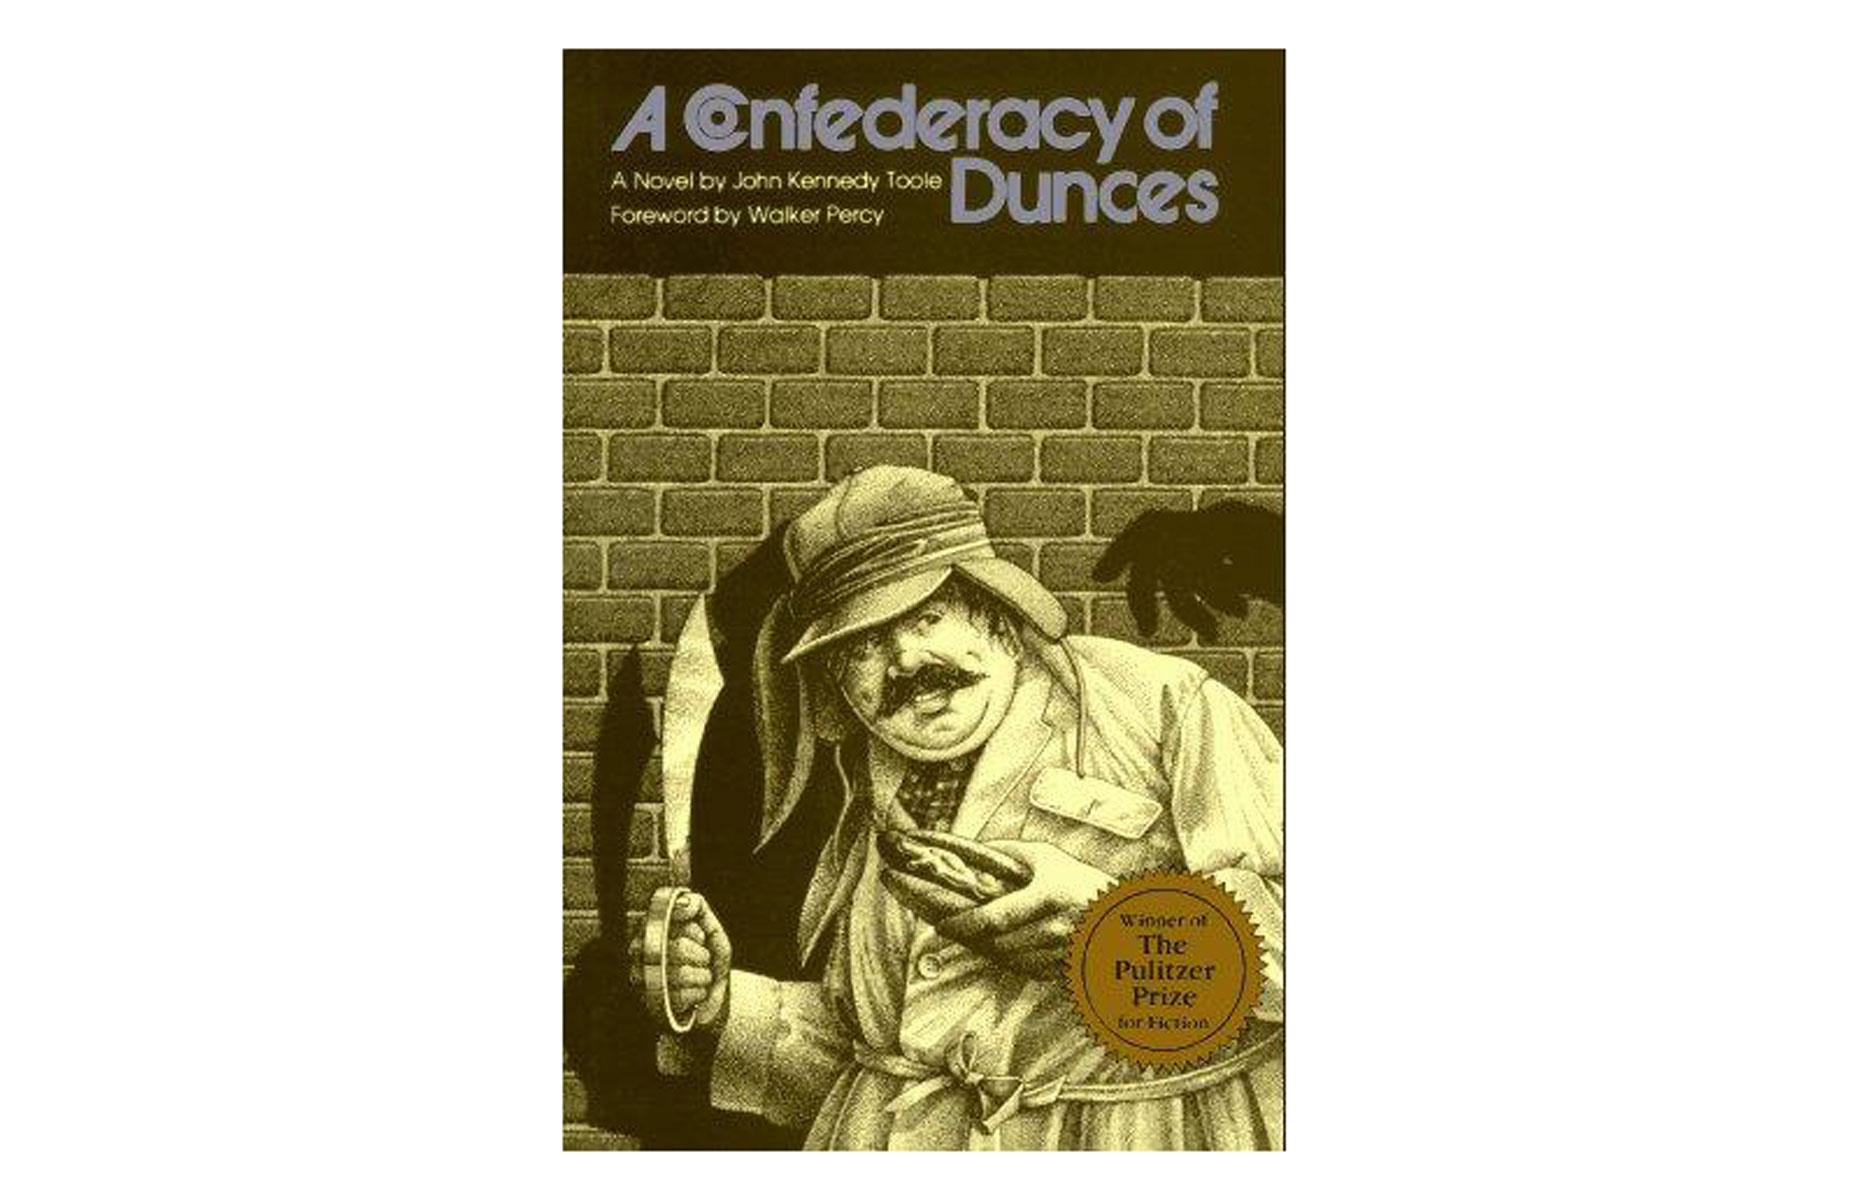 A Confederacy of Dunces by John Kennedy Toole first edition copy: $9,000 (£6.75k)